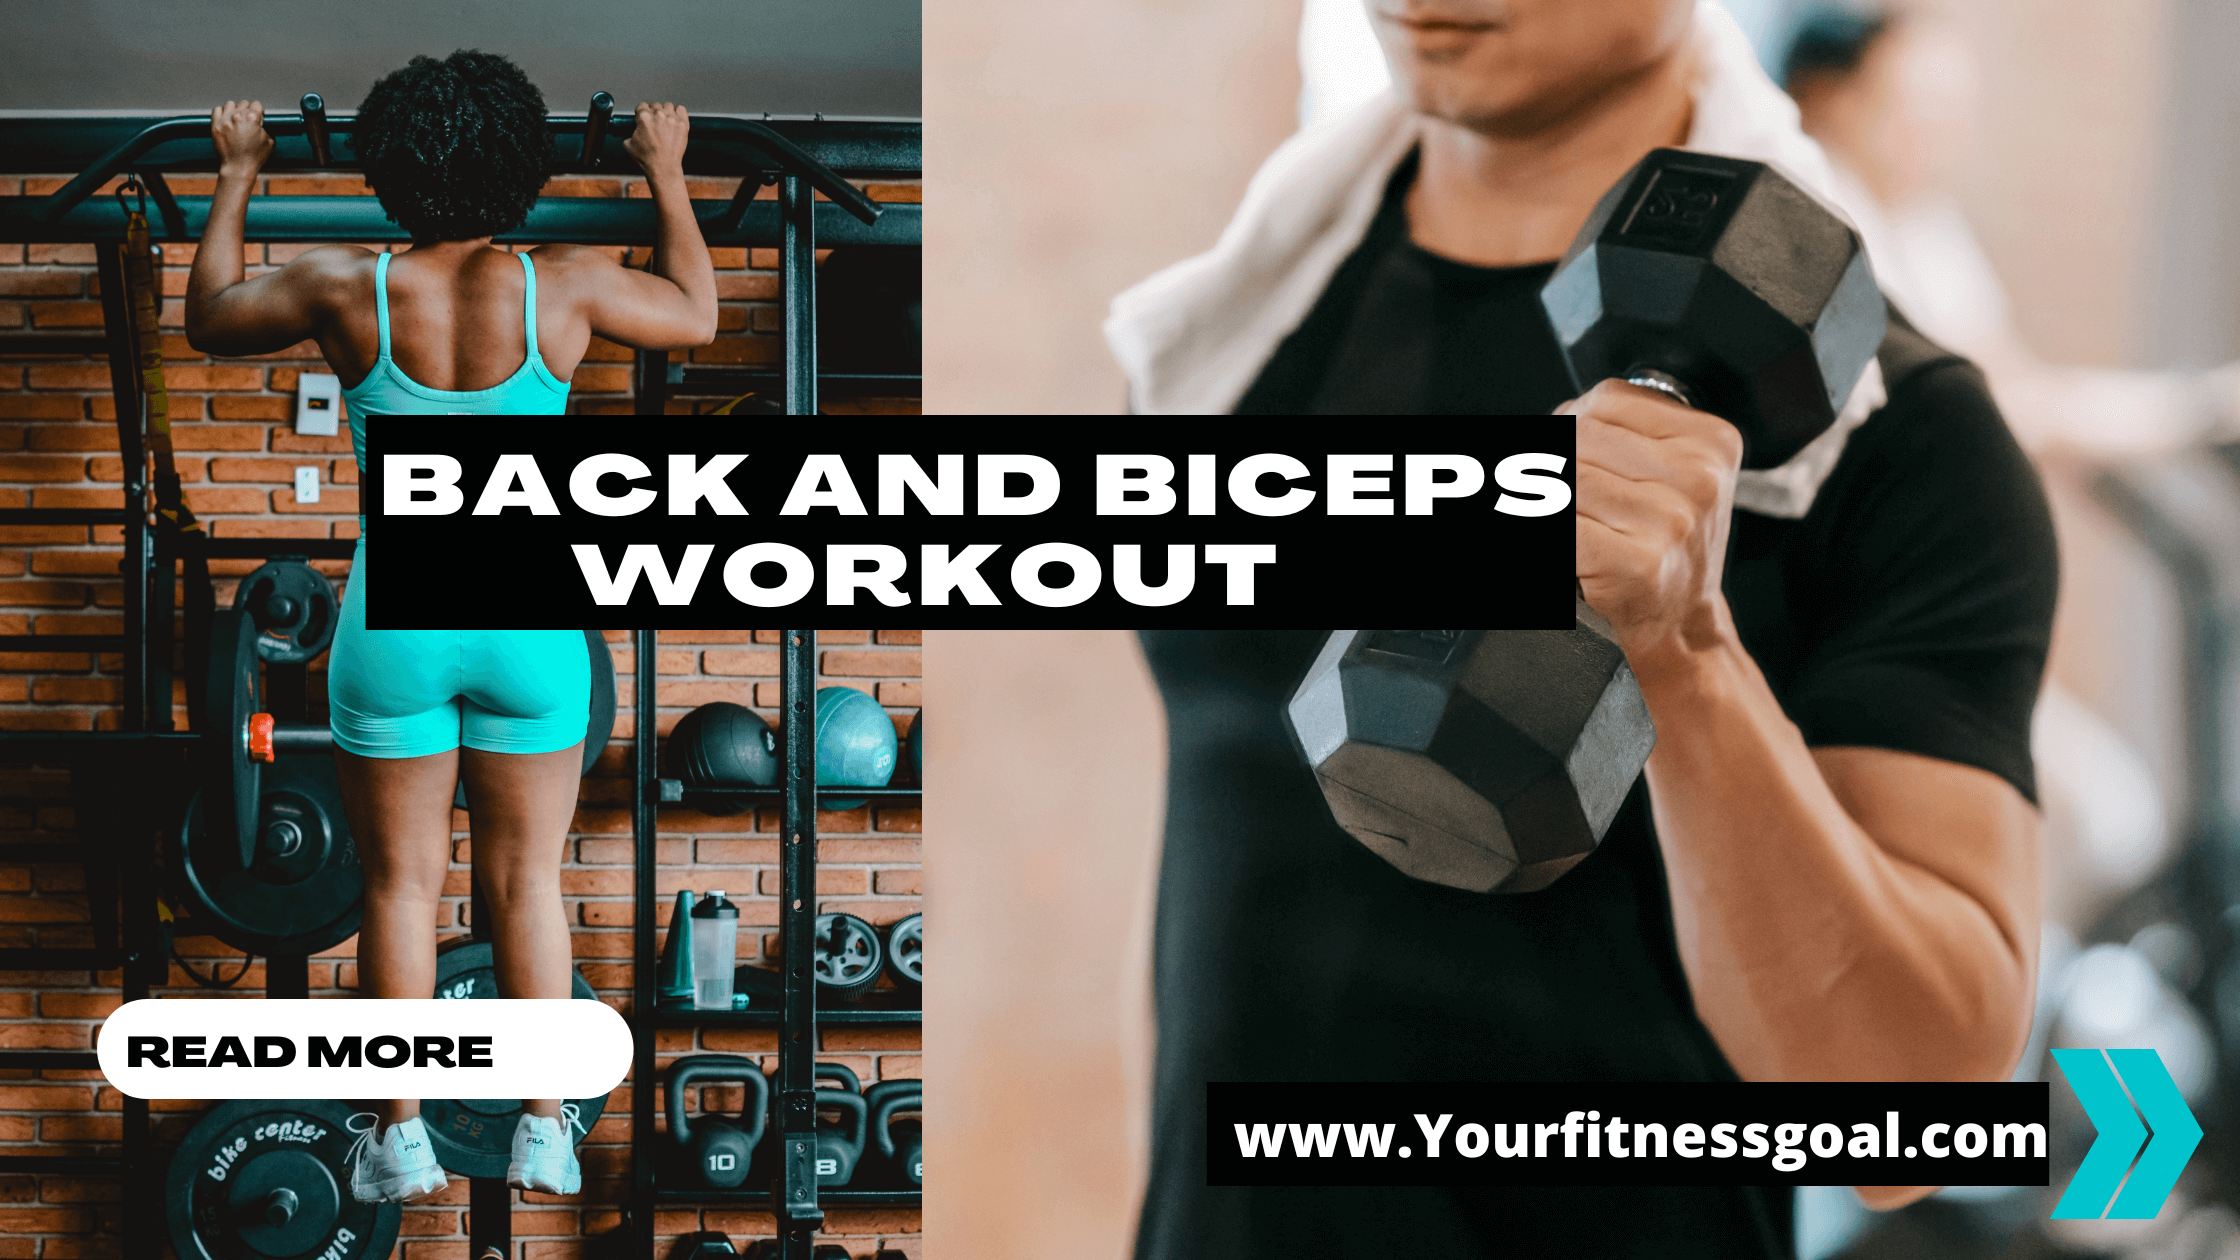 Body Beast Build Back And Biceps Workout Review Yourfitnessgoal